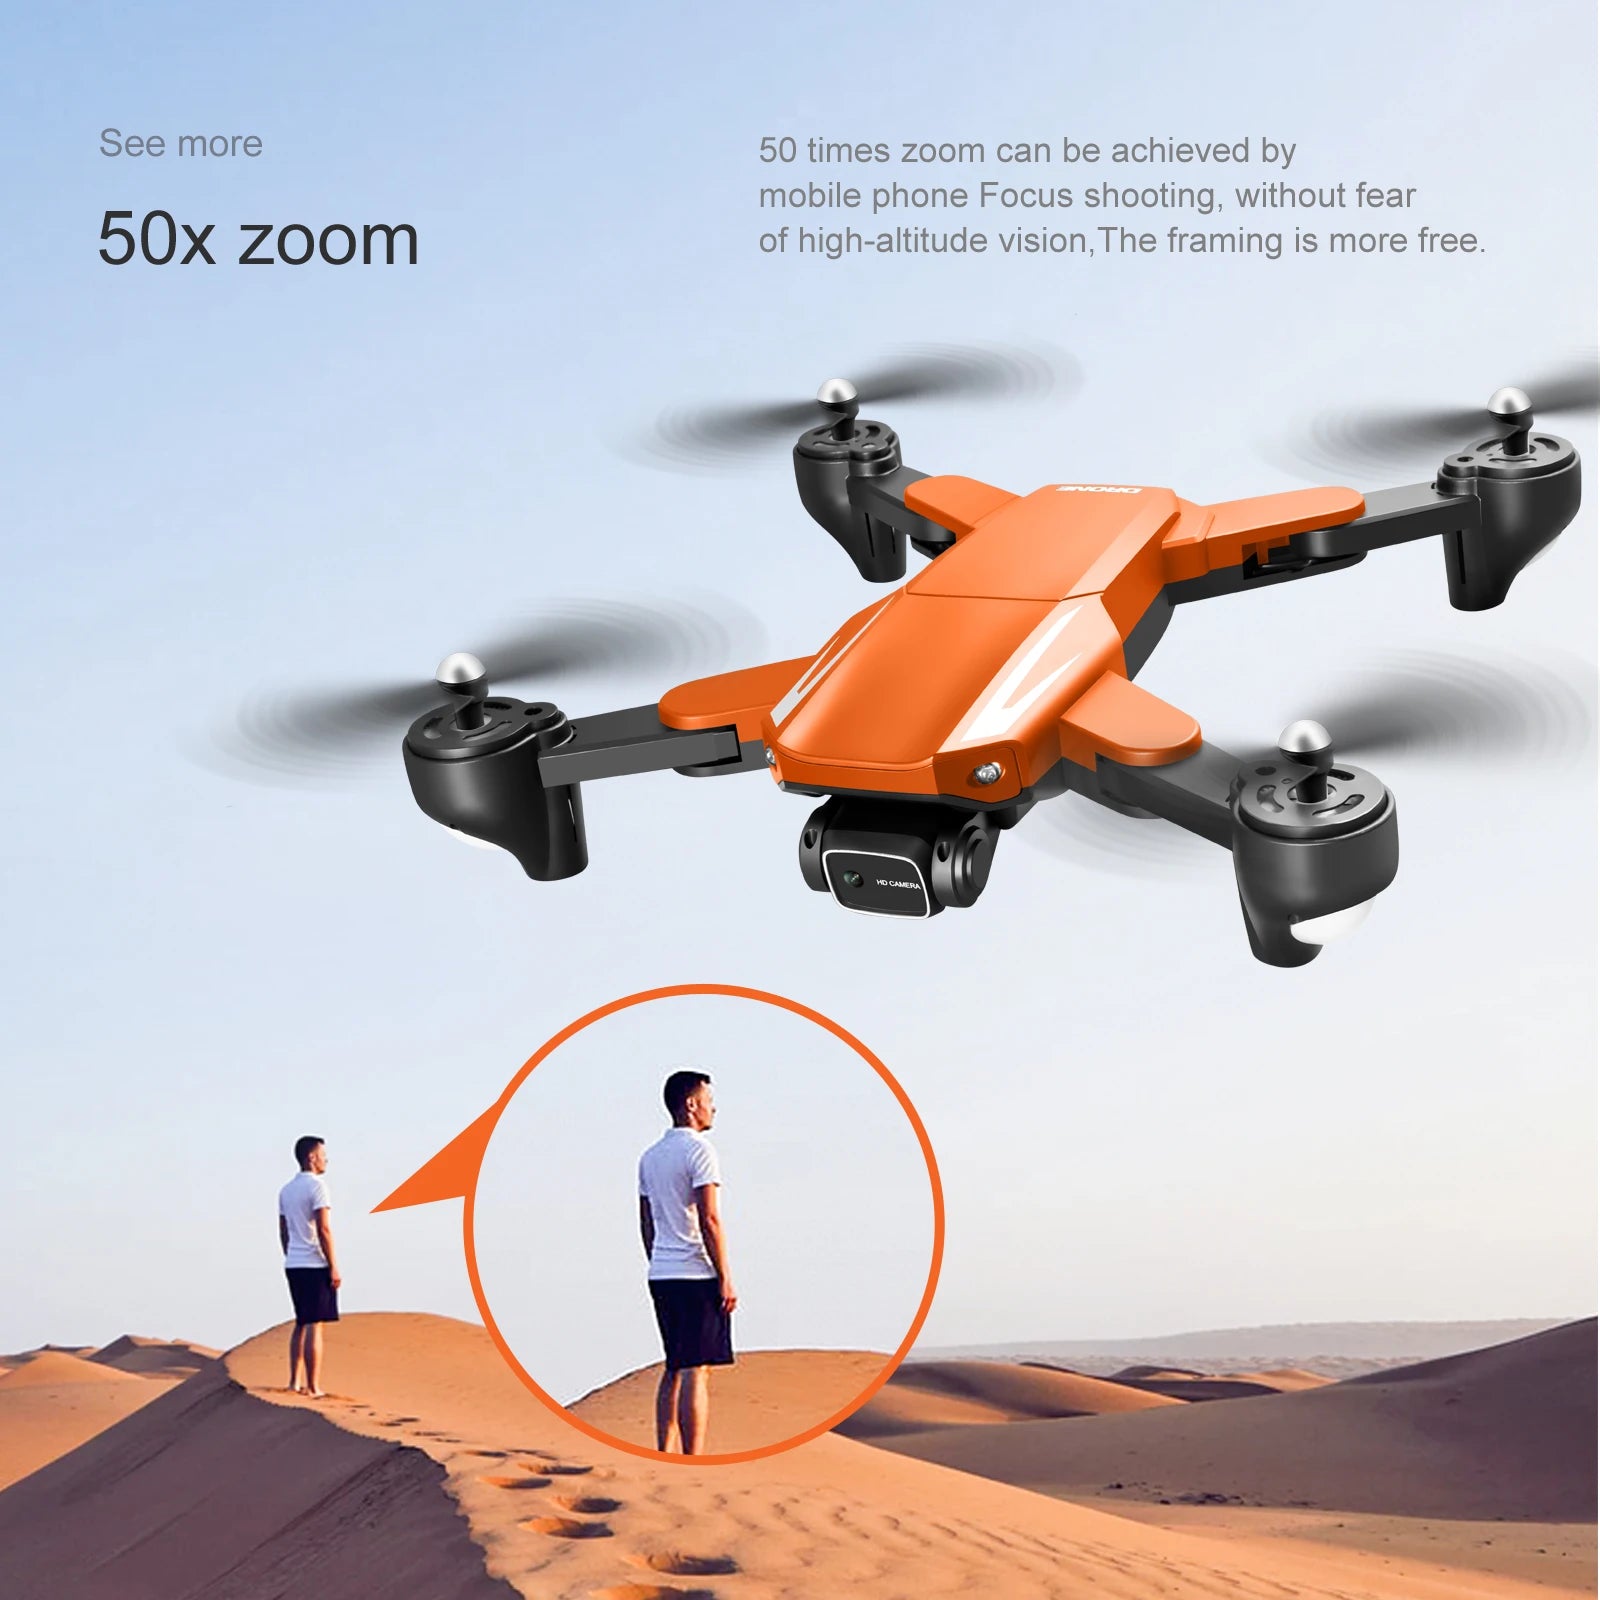 S93 Drone, see more 50 times zoom can be achieved by mobile phone focus shooting 